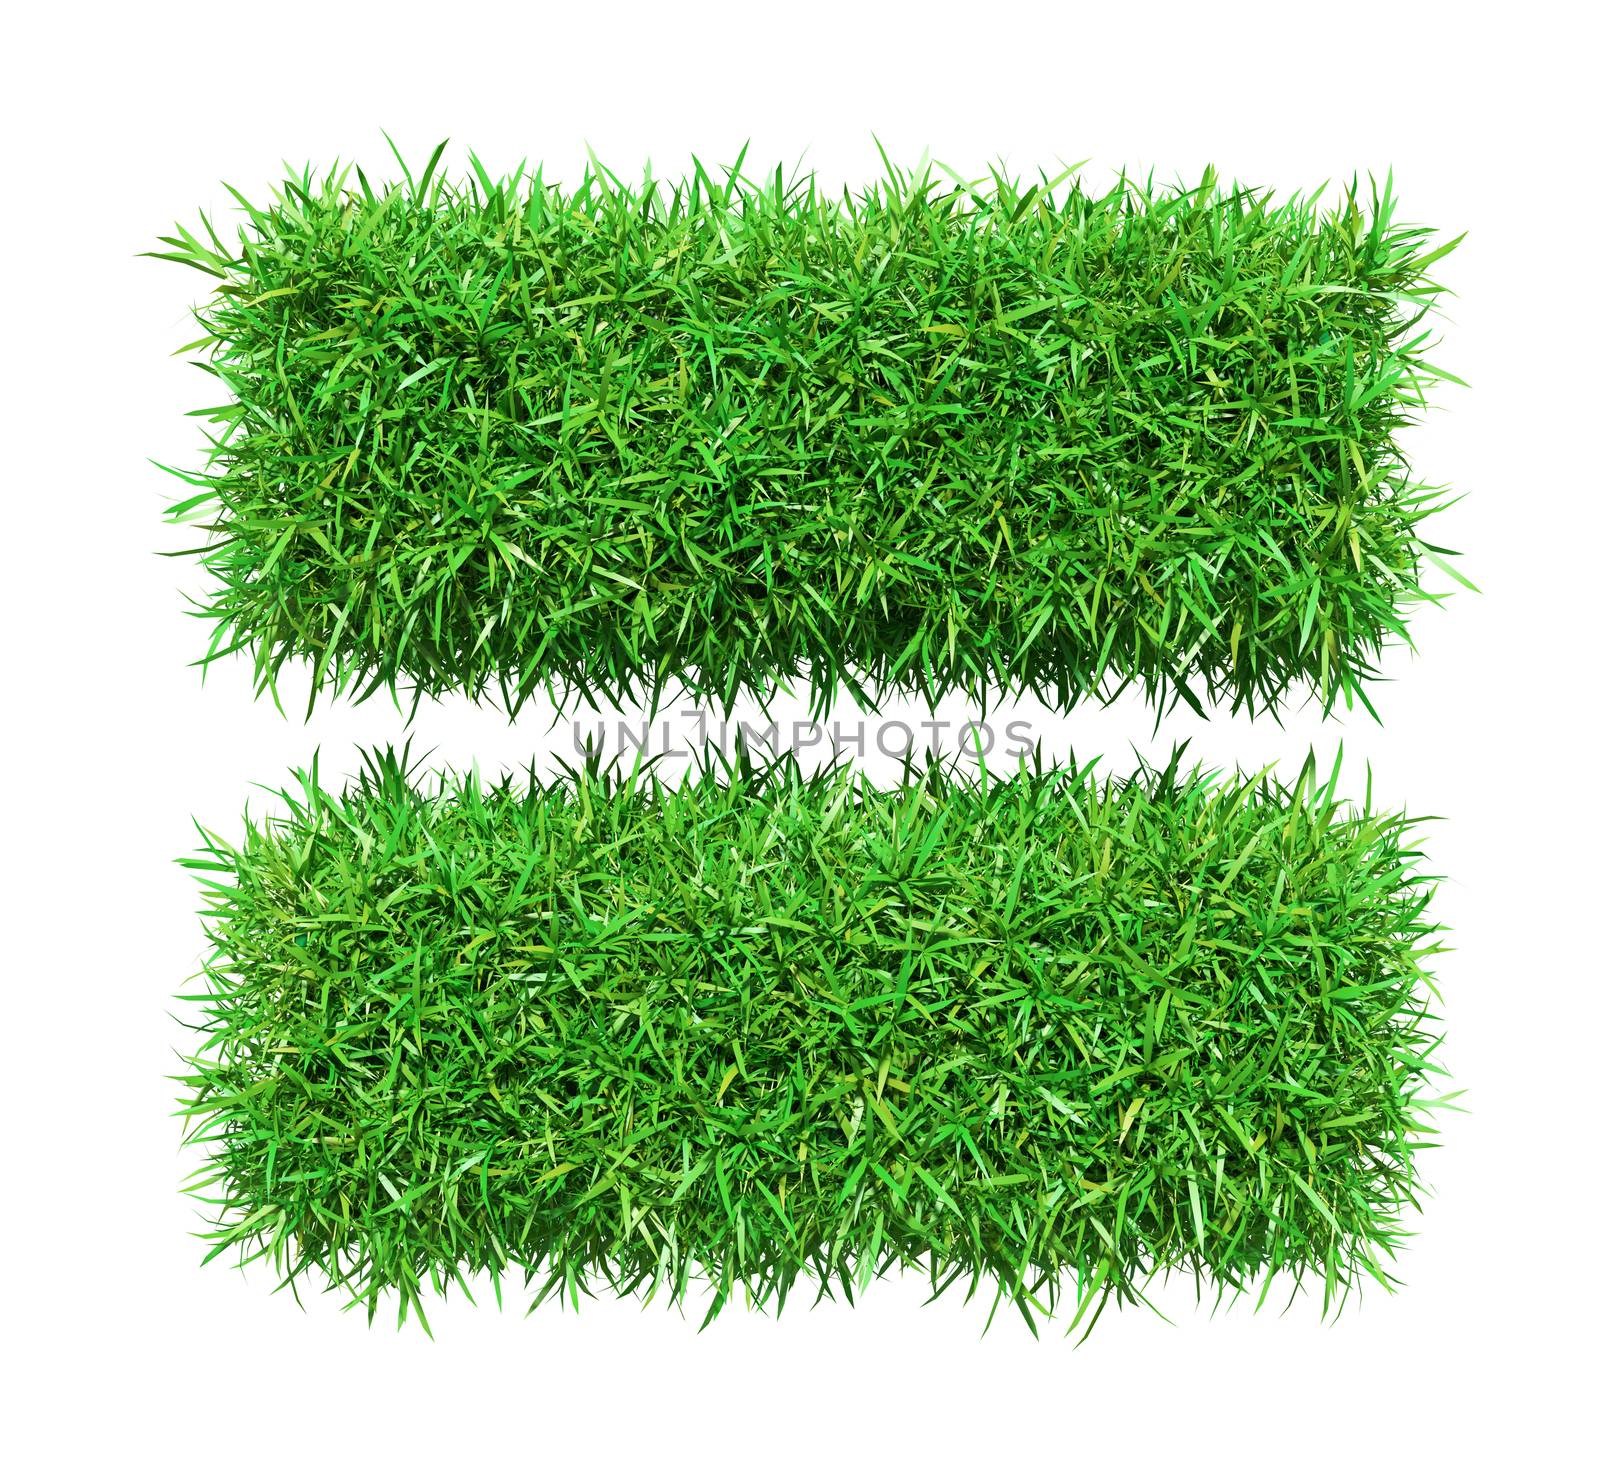 Green grass equally, isolated on white background. 3D illustration